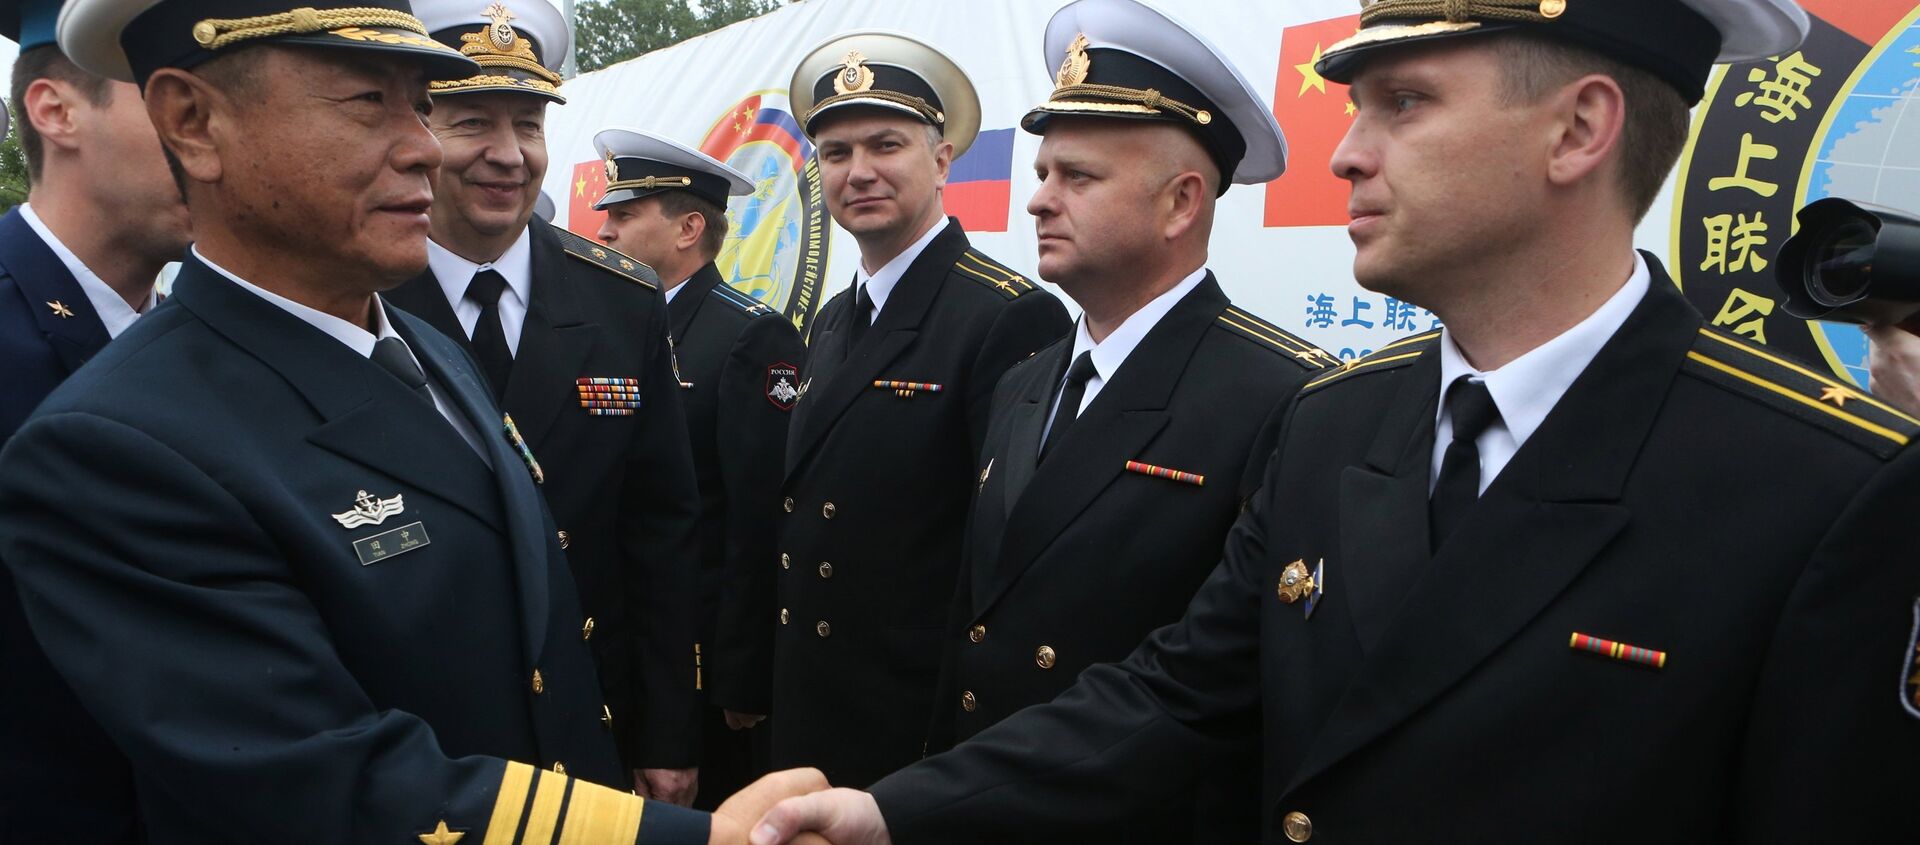 From left: Vice-Admiral Tian Zhong, Deputy Commander of the Chinese Navy, and Vice-Admiral Alexander Fedotenkov, Deputy Commander of the Russian Navy, during a greeting ceremony for the Chinese Navy warships that arrived in Baltiysk for the 2017 Naval Cooperation Russia-China drills - Sputnik International, 1920, 17.12.2020